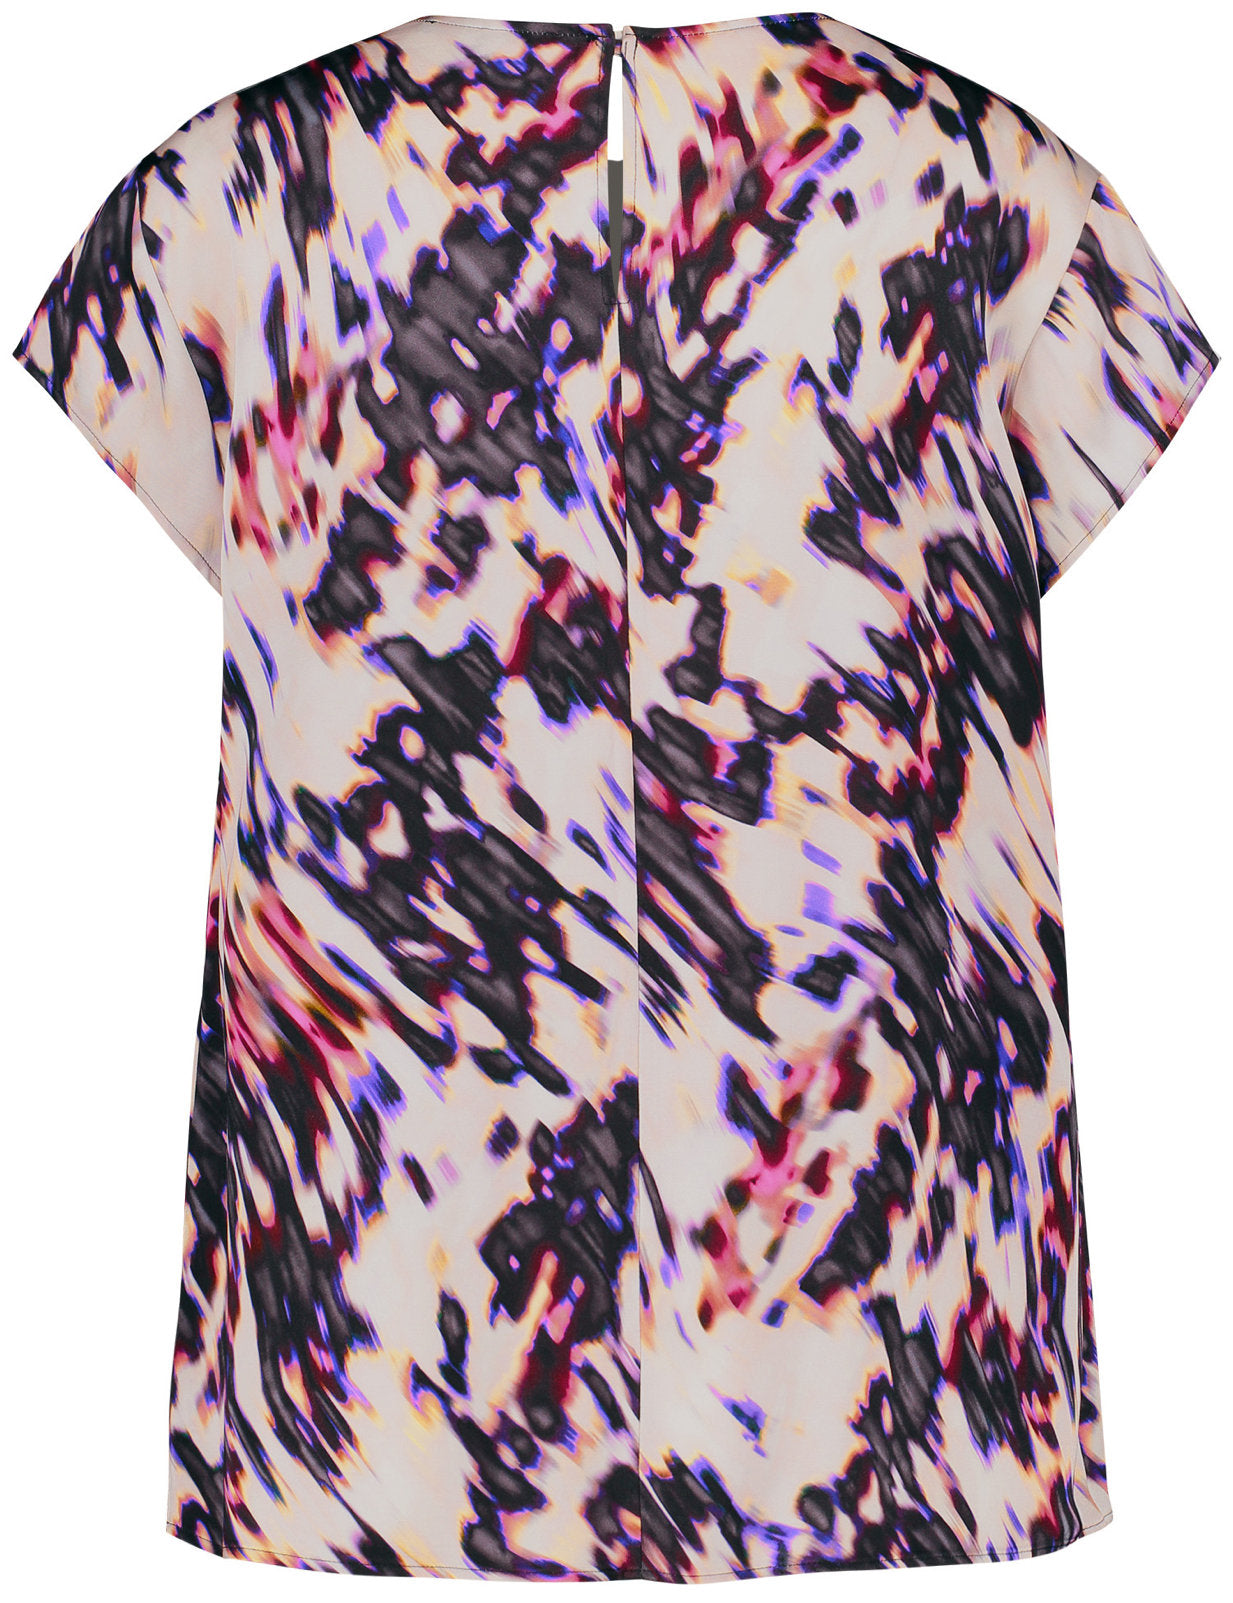 Fine Blouse Top With An All-Over Print_560316-11009_9452_03